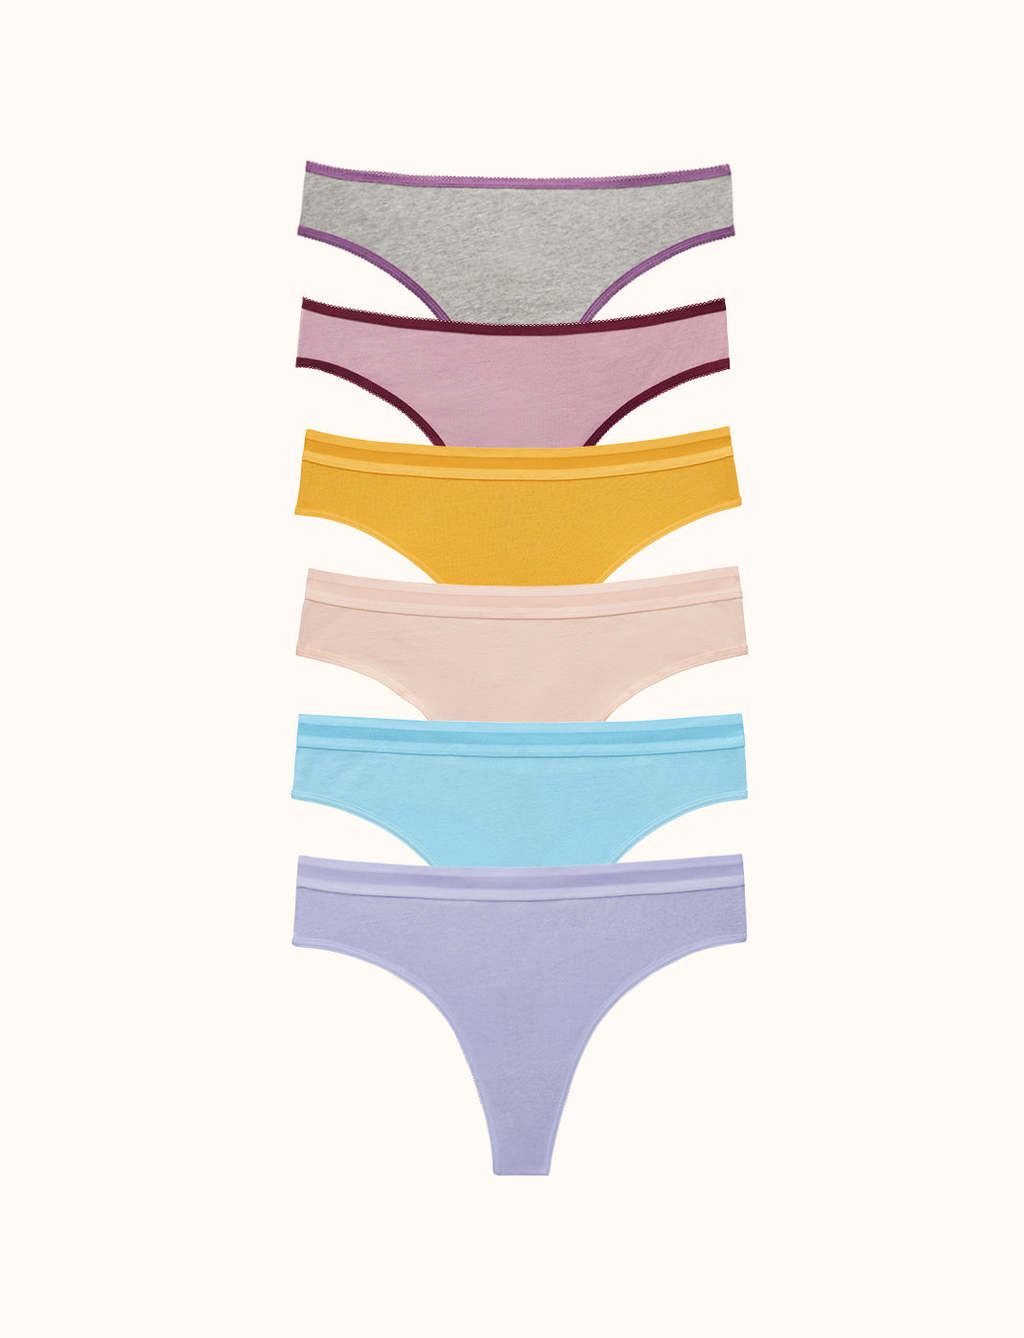 20 Of The Best Undergarments For Women & Men To To Keep You Cool This Season